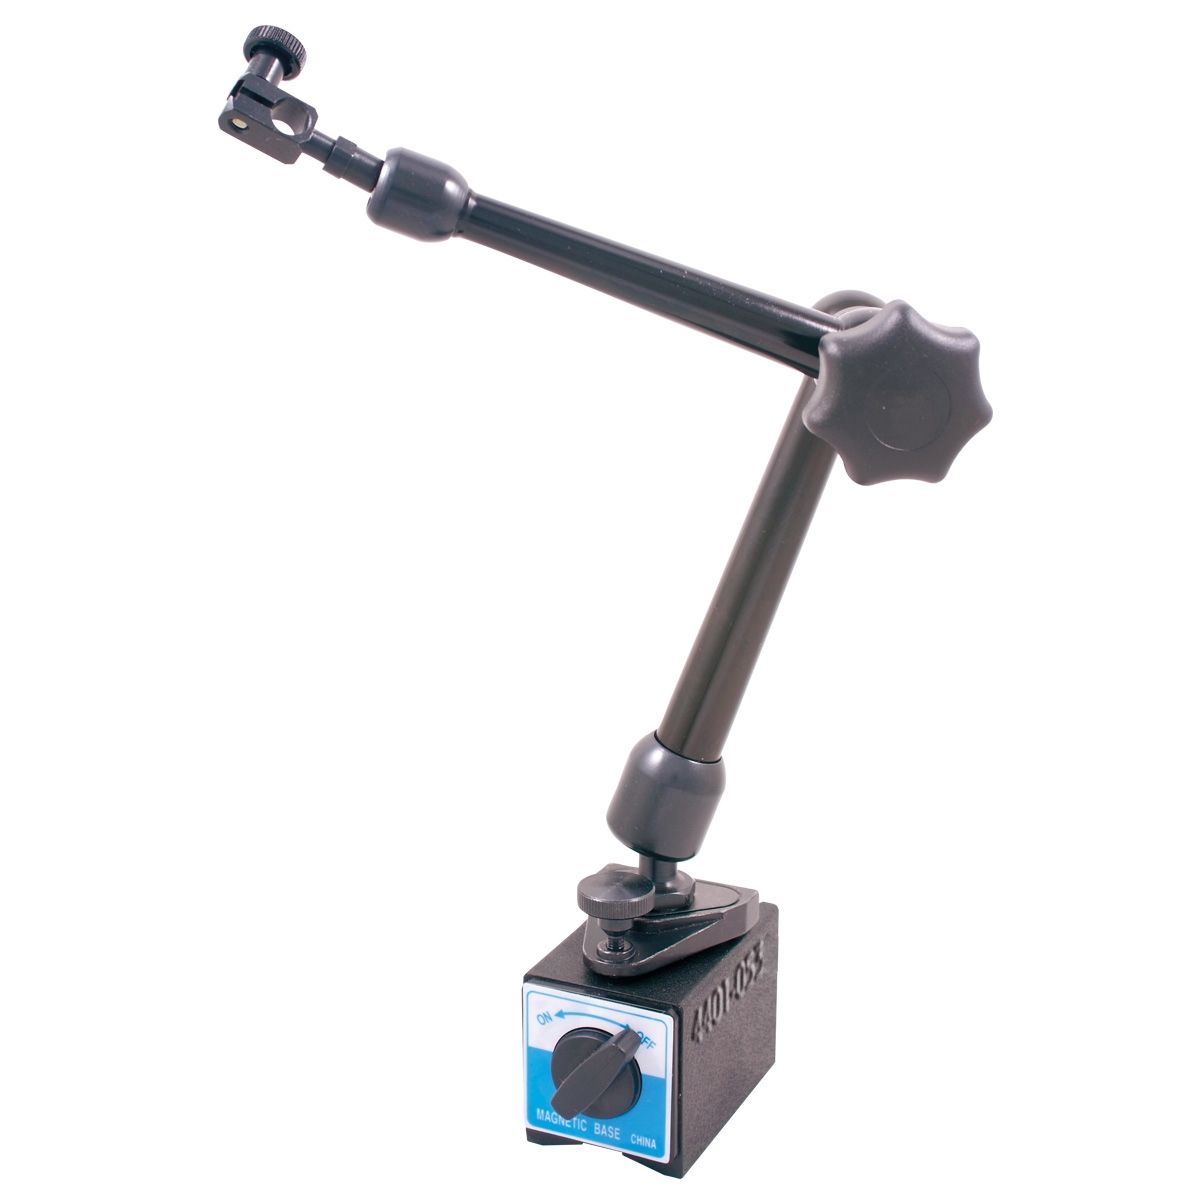 66 LBS PULL MAGNETIC BASE WITH FINE ADJUST ON TOP OF BASE (4401-0532)